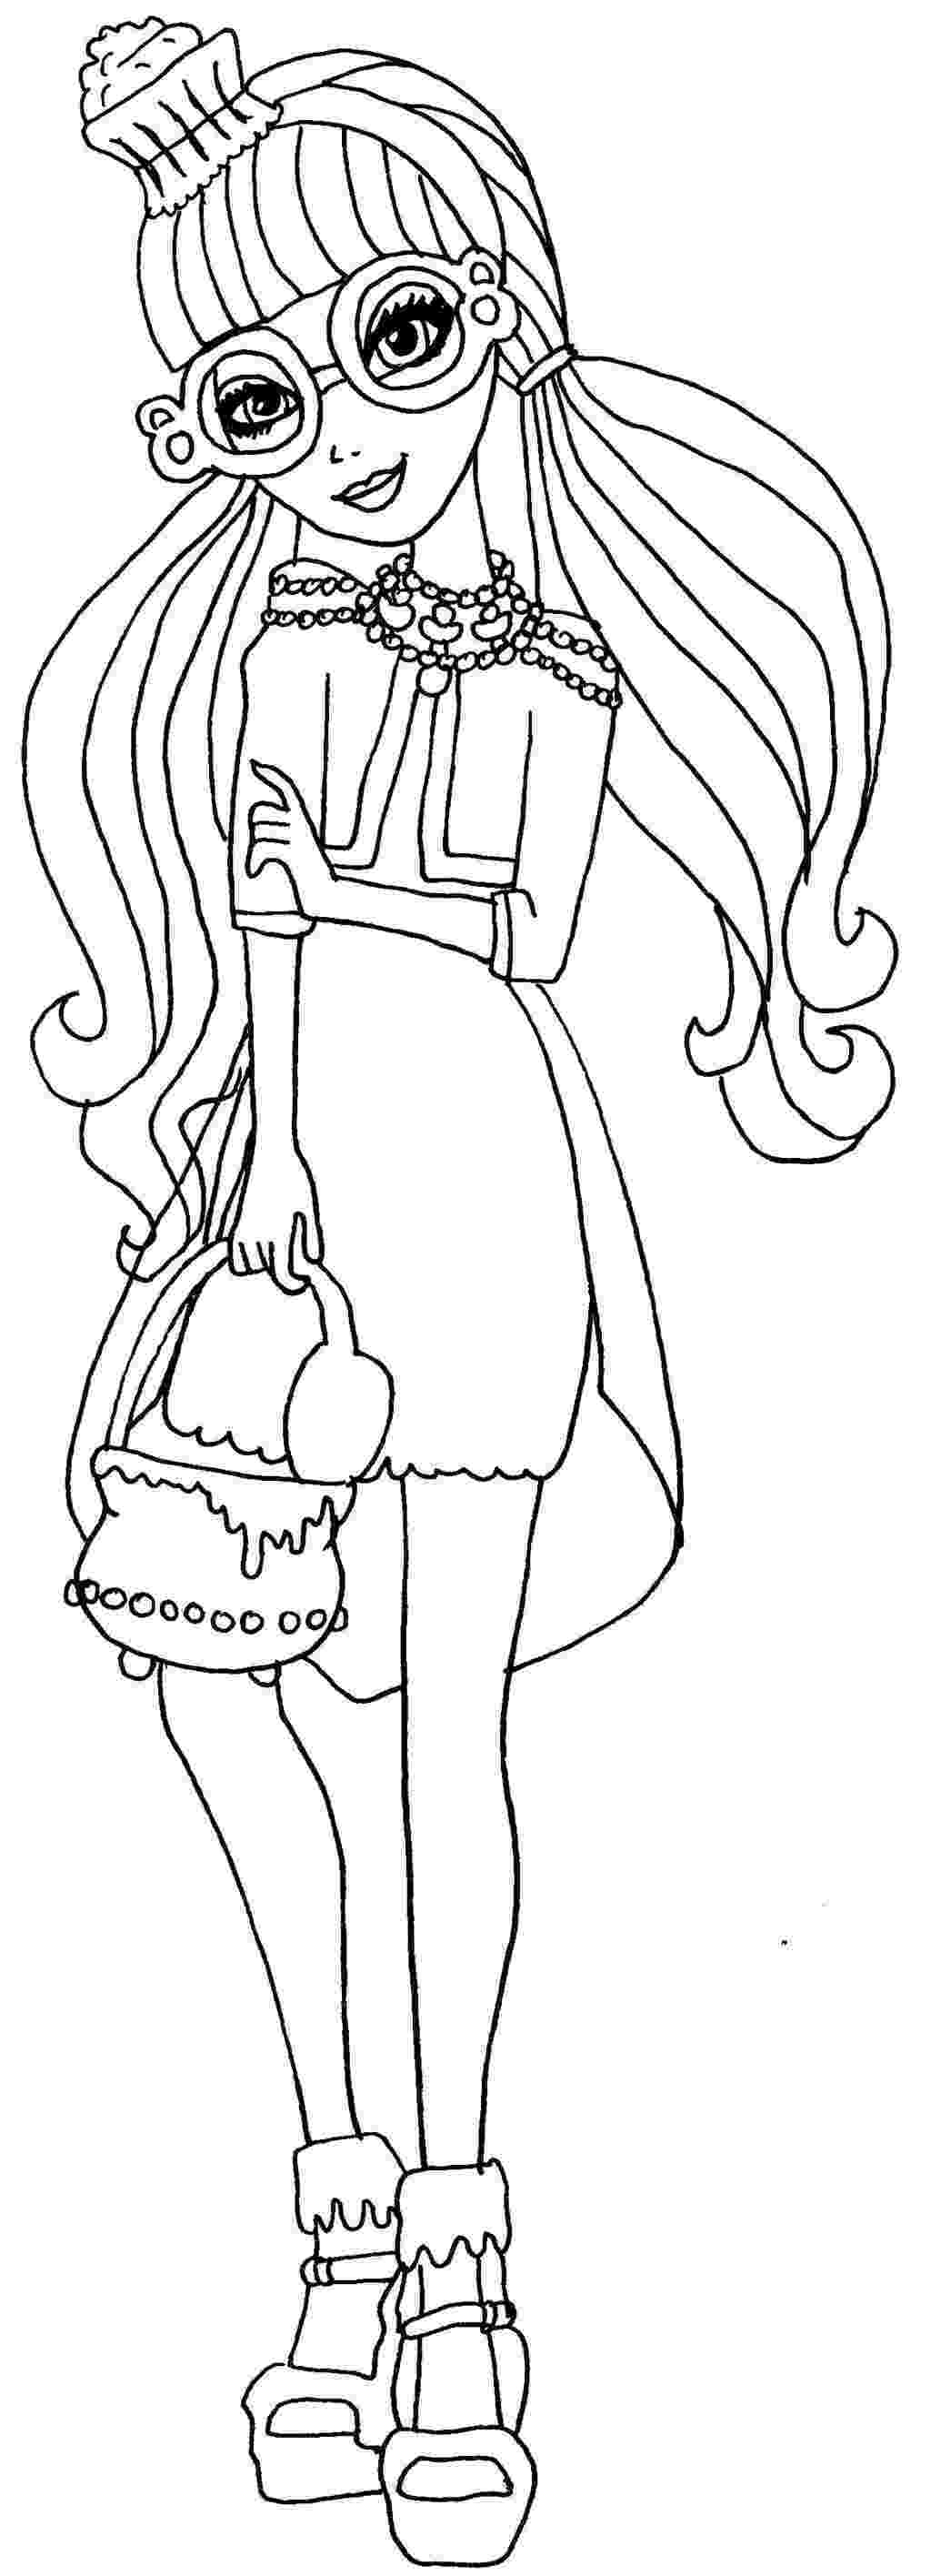 ever after high coloring sheets ever after high coloring pages 7 coloring pages for kids coloring ever high after sheets 